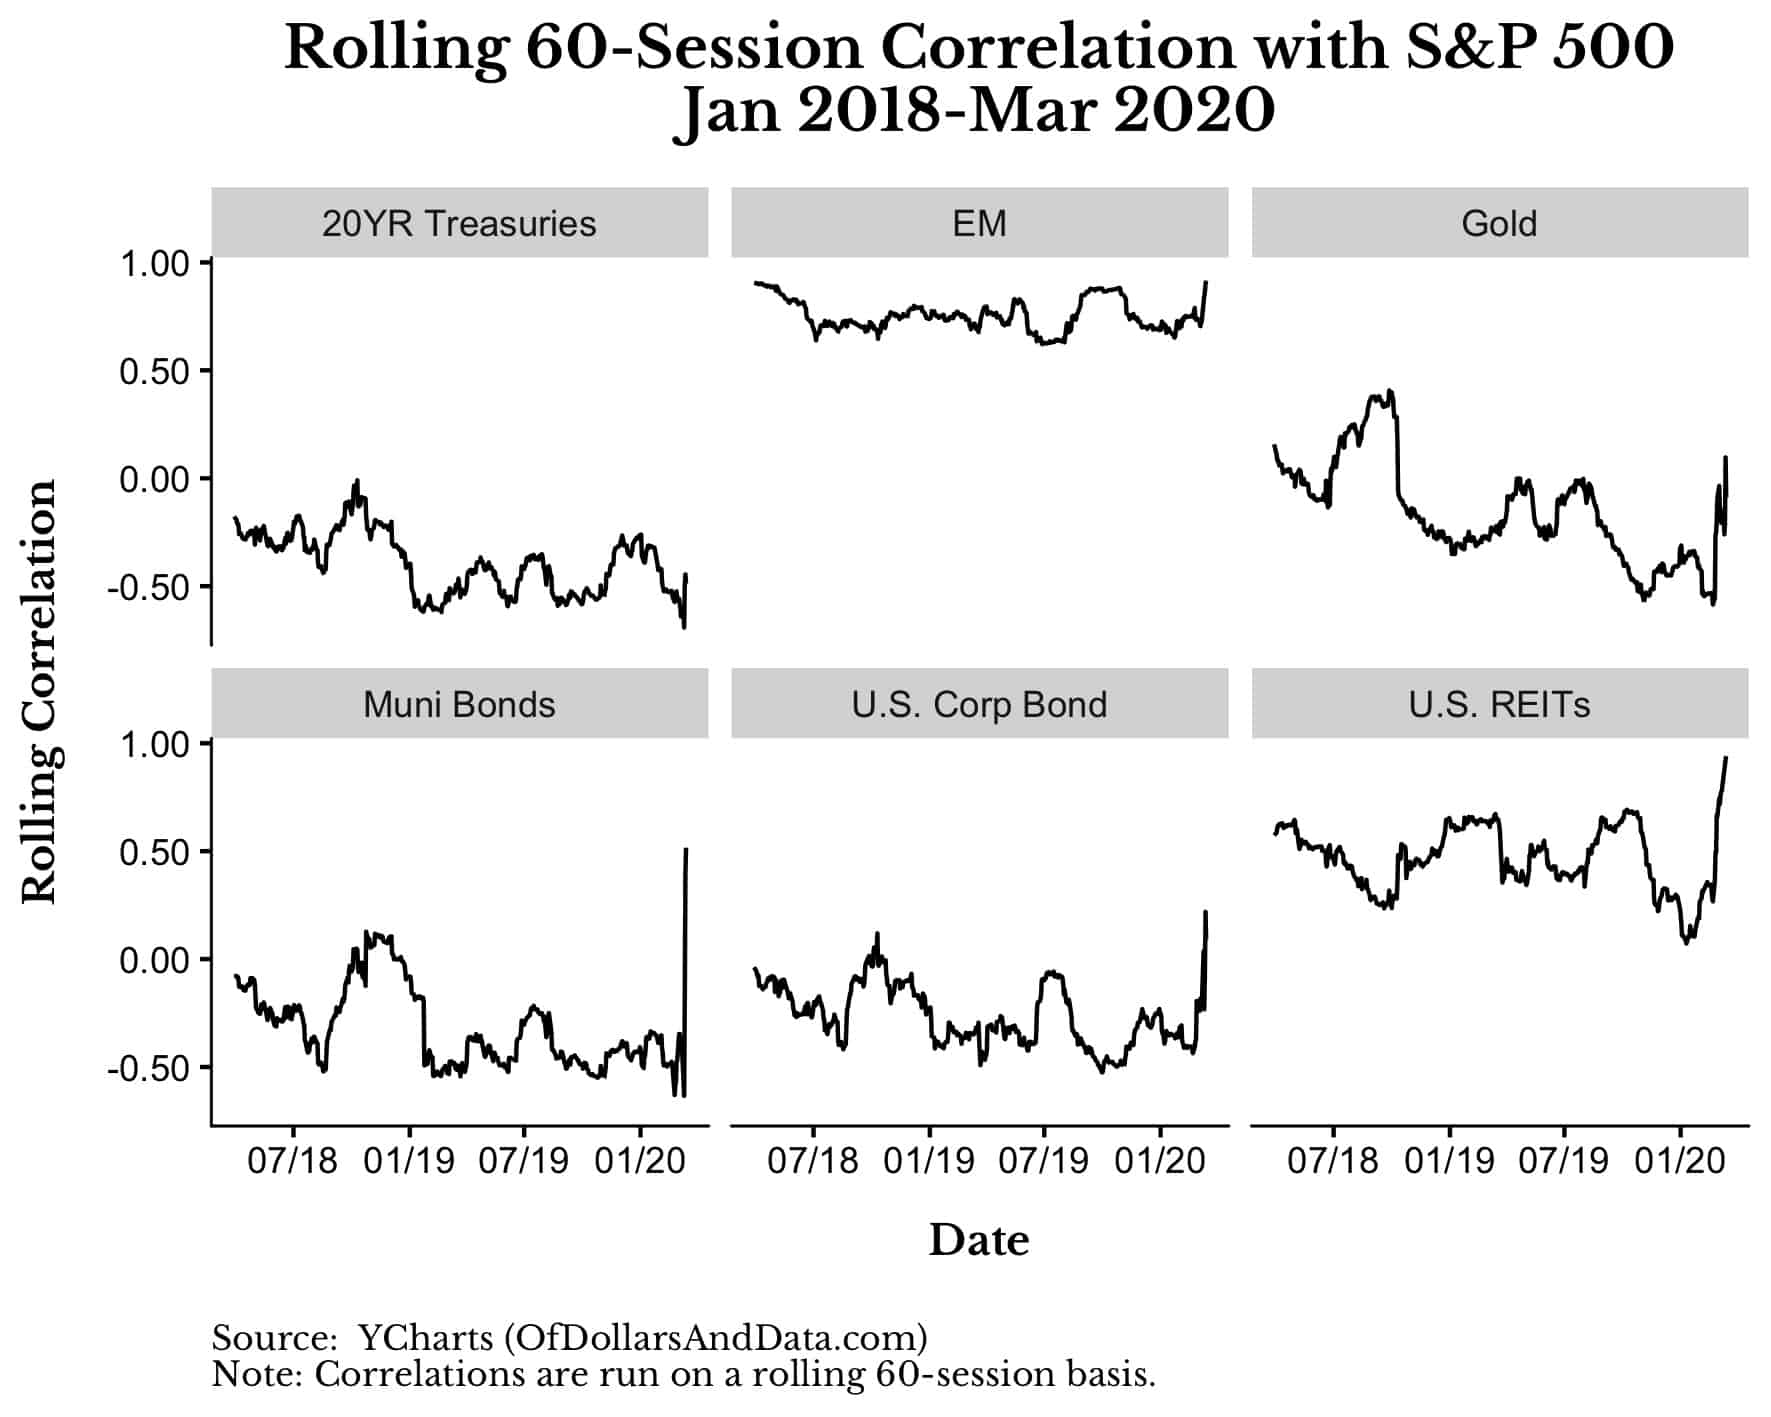 Rolling 60-session correlation of various assets with the S&P 500, Jan 2018 to March 2020